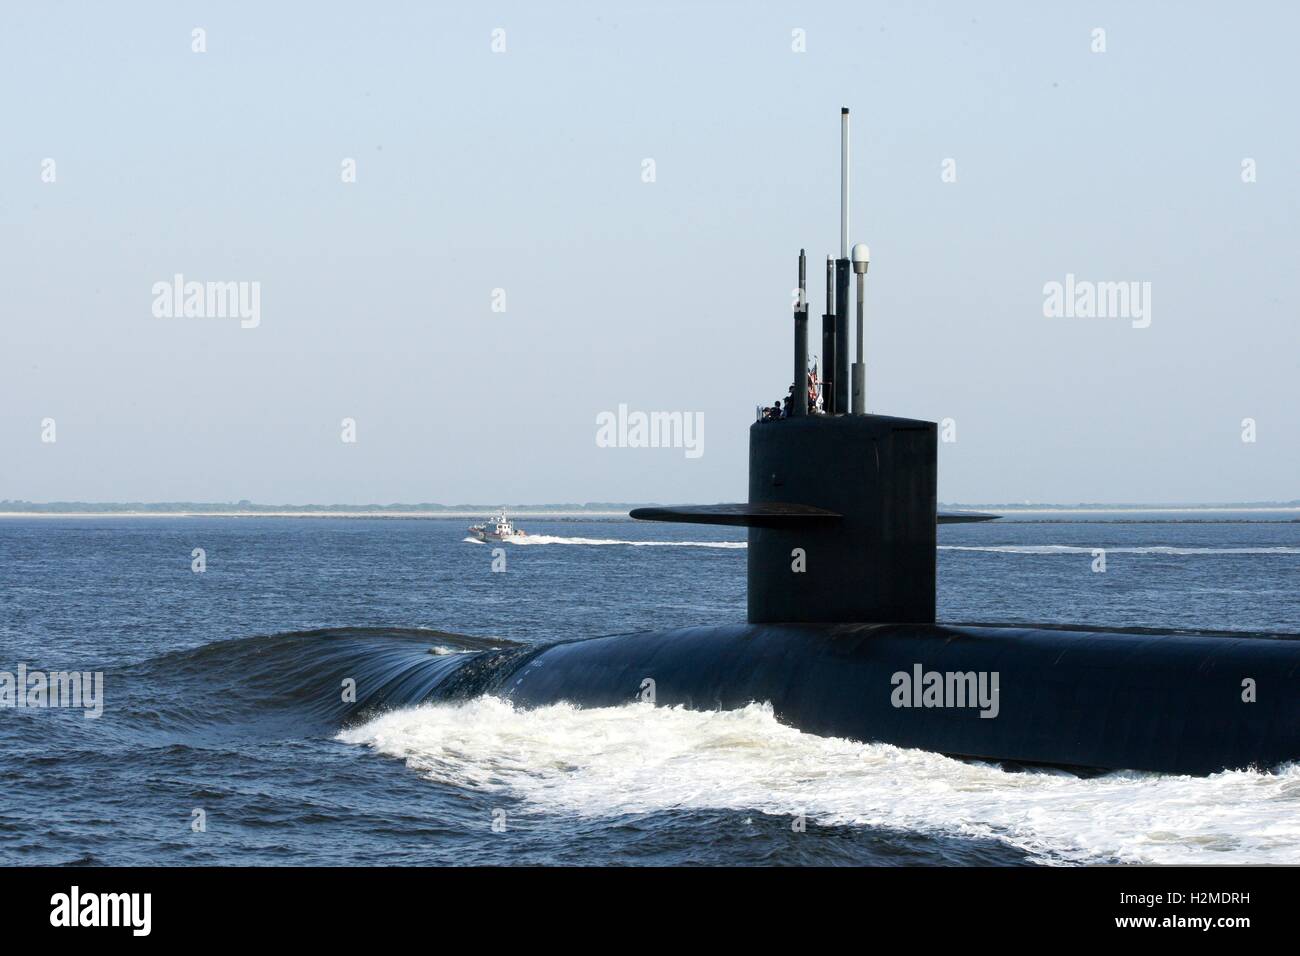 The USN Ohio-class ballistic missile submarine USS Alaska returns to the Naval Submarine Base Kings Bay after a patrol May 22, 2014 in Kings Bay, Georgia. Stock Photo